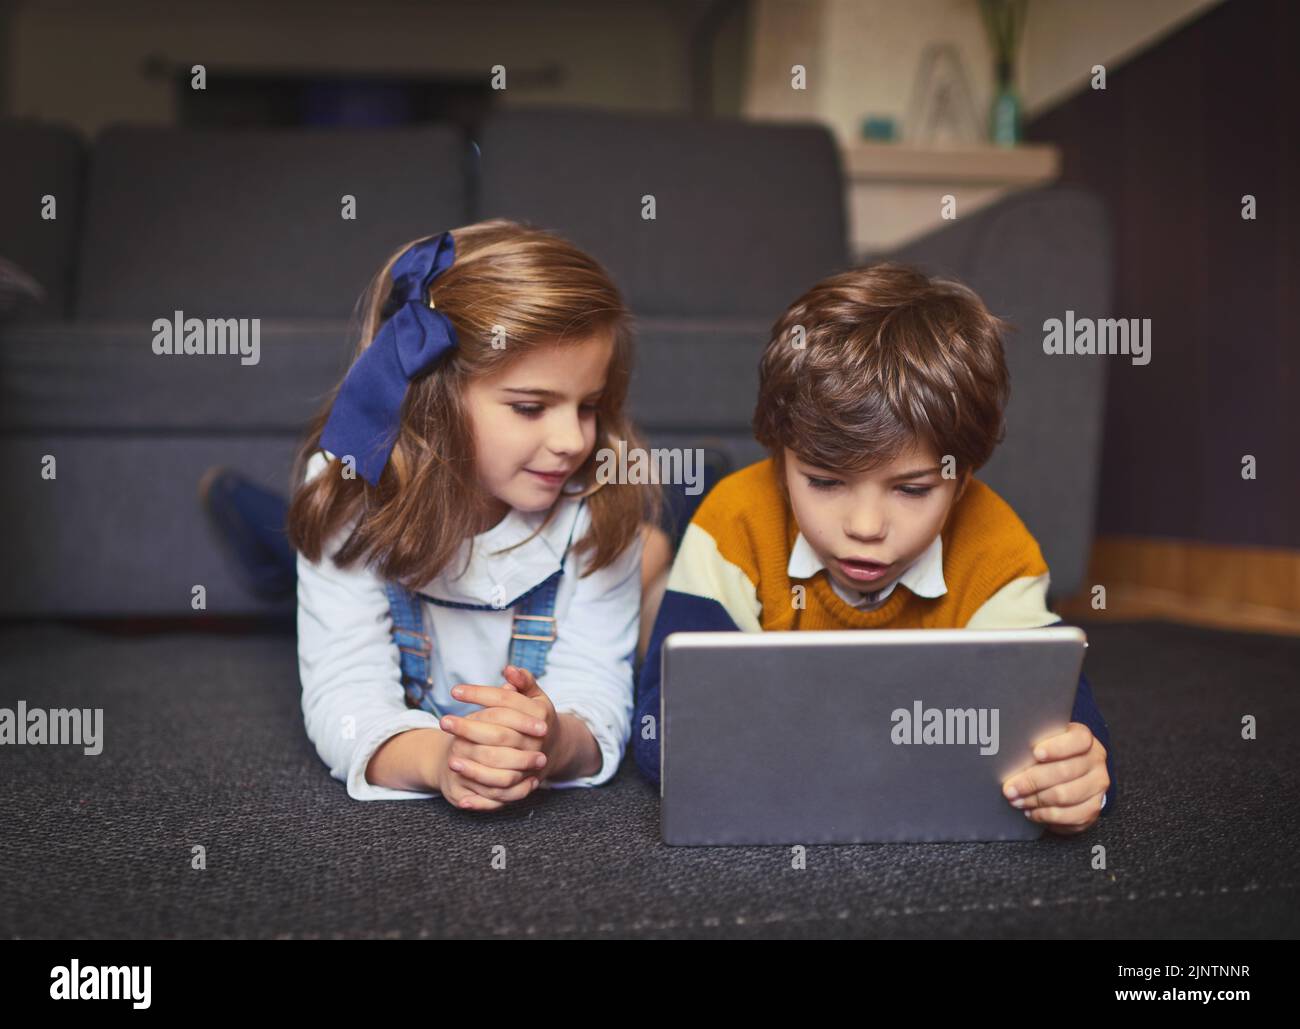 Learning for the future. adorable little kids using wireless technology at home. Stock Photo